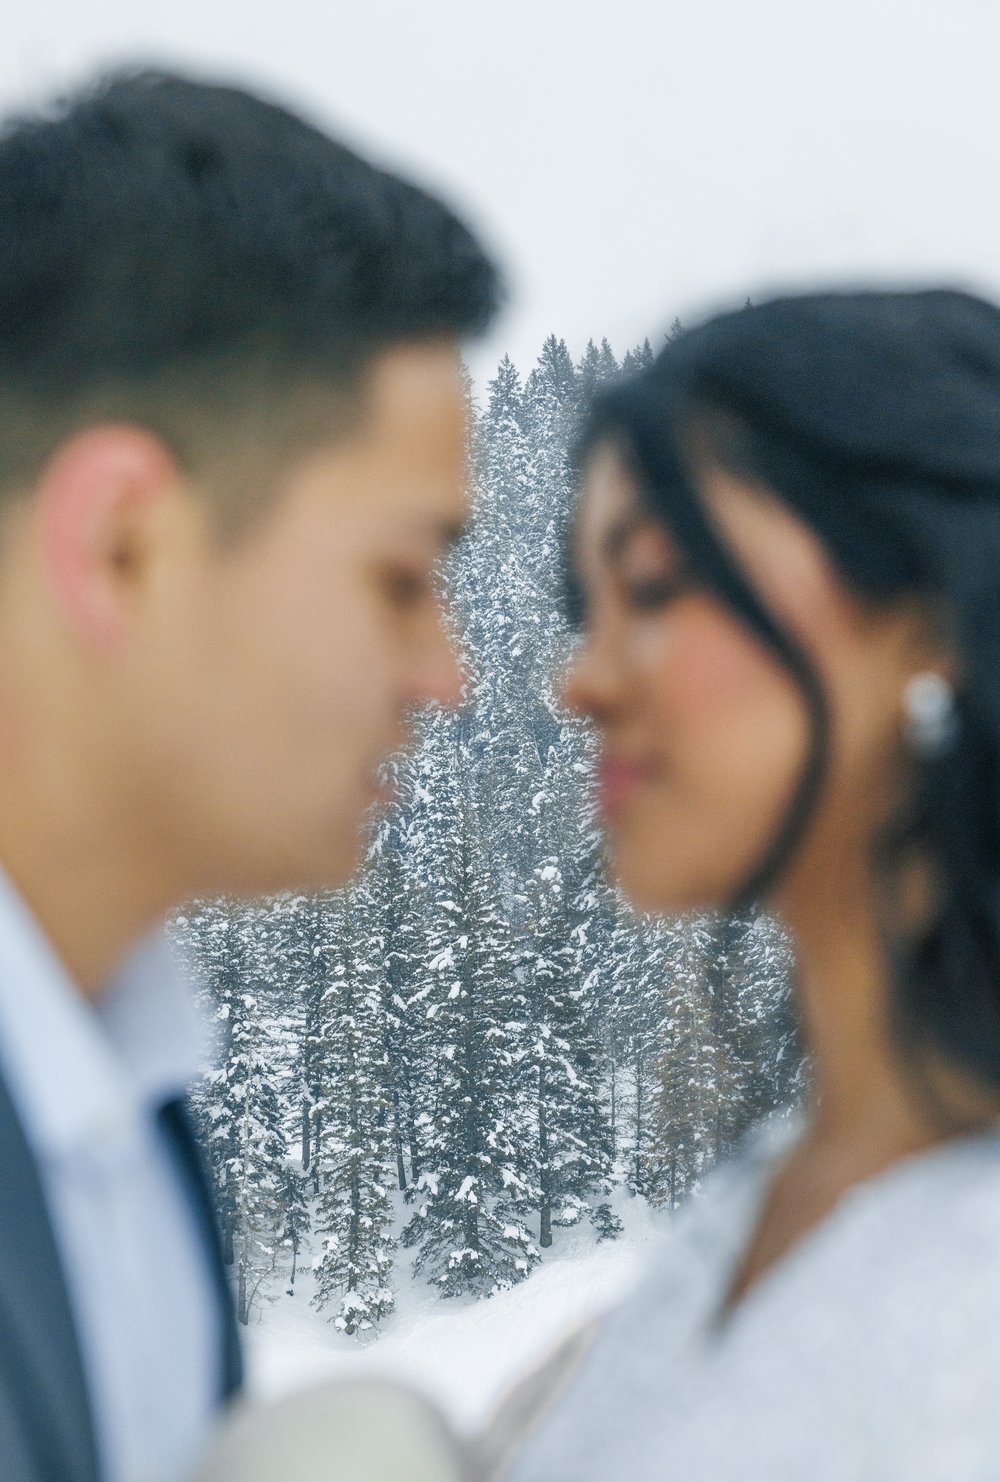  Trendy blurry kissing portrait of newlyweds by Savanna Richardson Photography. Tibble Fork bridal shots #SavannaRichardsonPhotography #SavannaRichardsonBridals #WinterBridals #WinterWedding #TibbleForkBridals #UtahBridals #MountainBridals 